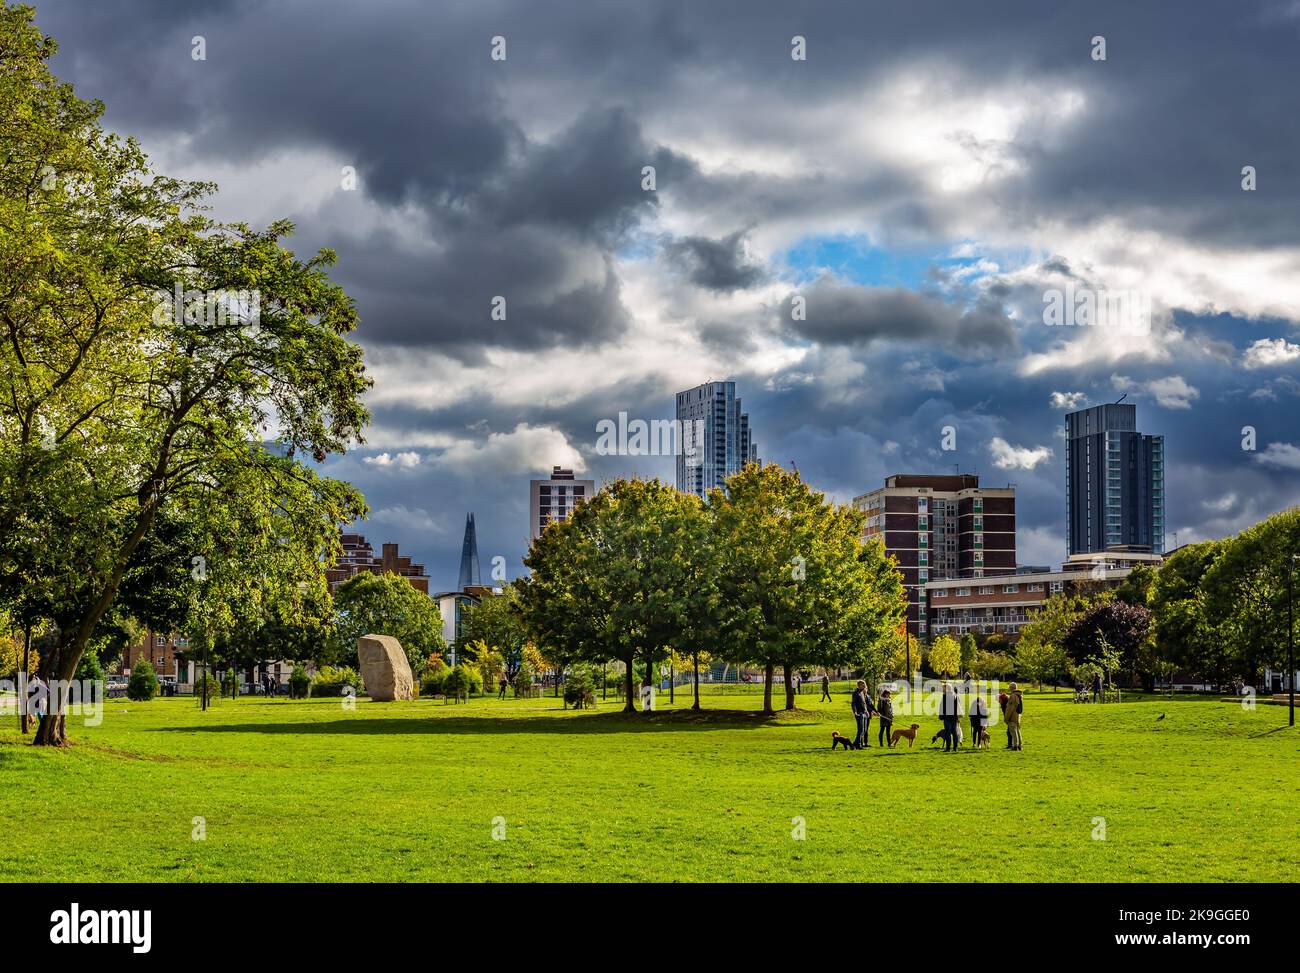 London has many open spaces such as this bordering on the City of London.Shoreditch park seen here looking towards ominous clouds and skyscrapers Stock Photo